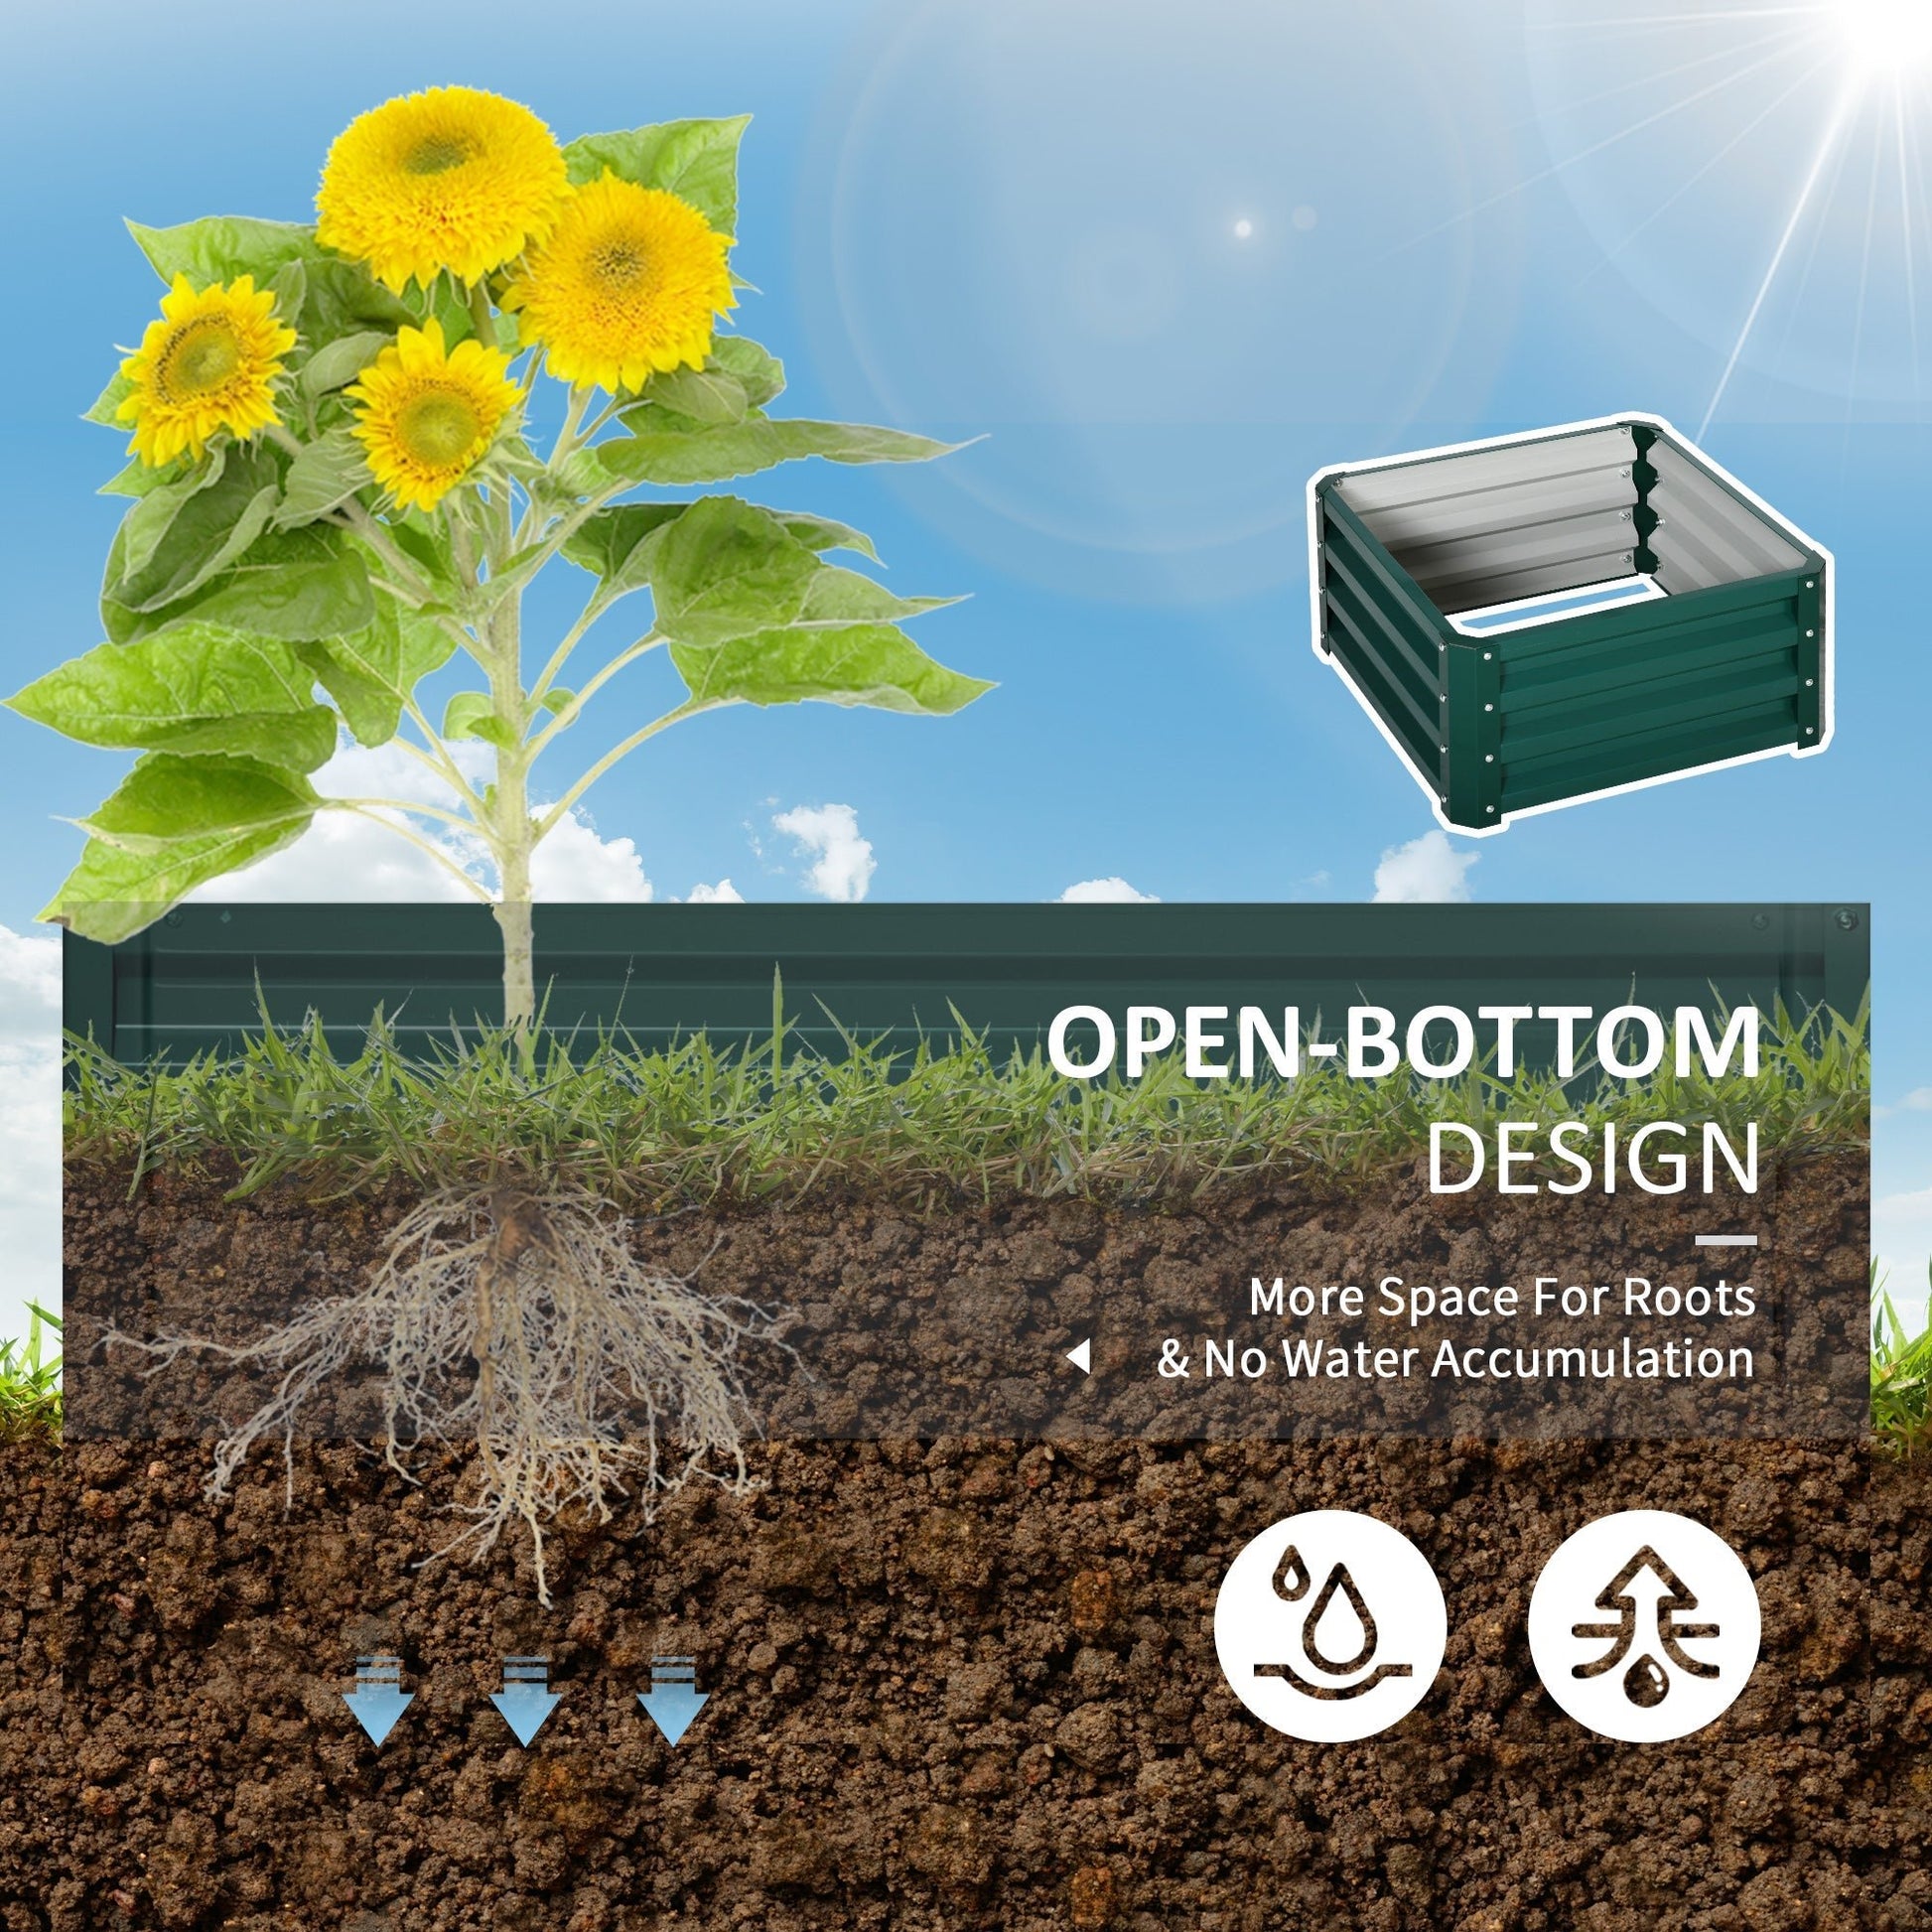 2' x 2' x 1' 2-Pieces Raised Garden Bed with Color Steel Frame for Vegetables, Flowers, Herbs, Green - Gallery Canada